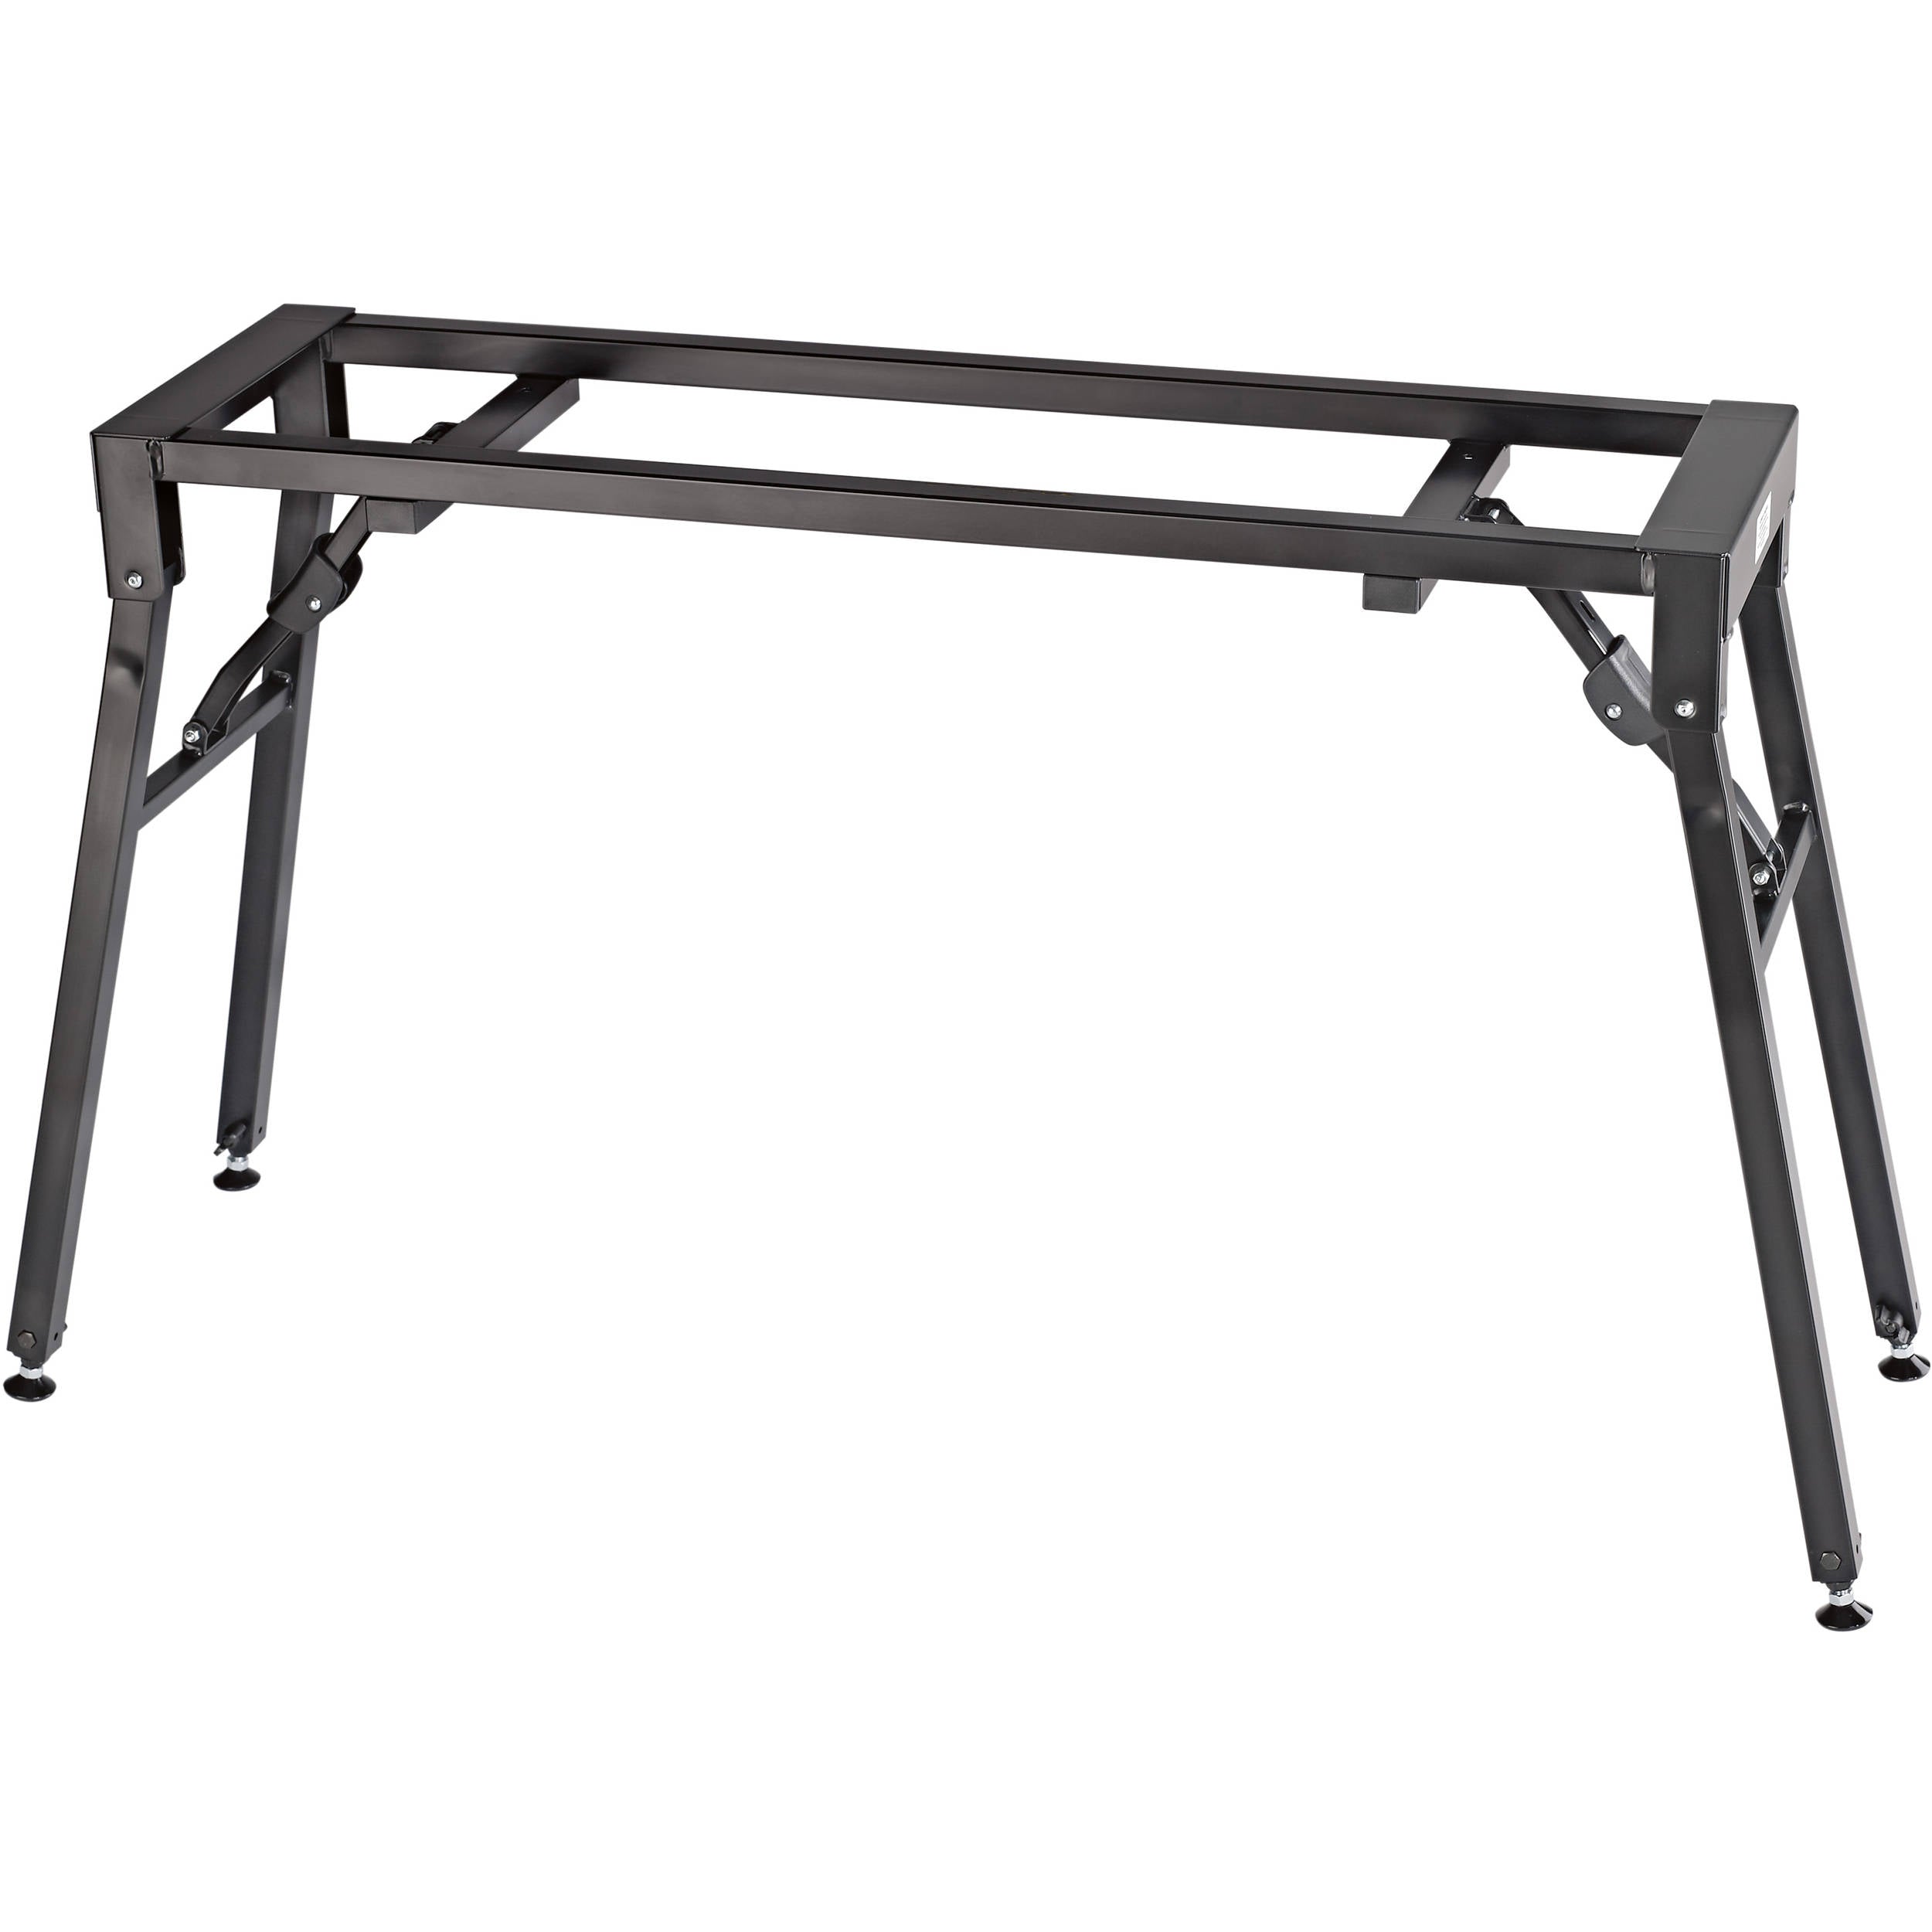 K&M TABLE STYLE STAND FOR DIGITAL PIANOS, BLACK